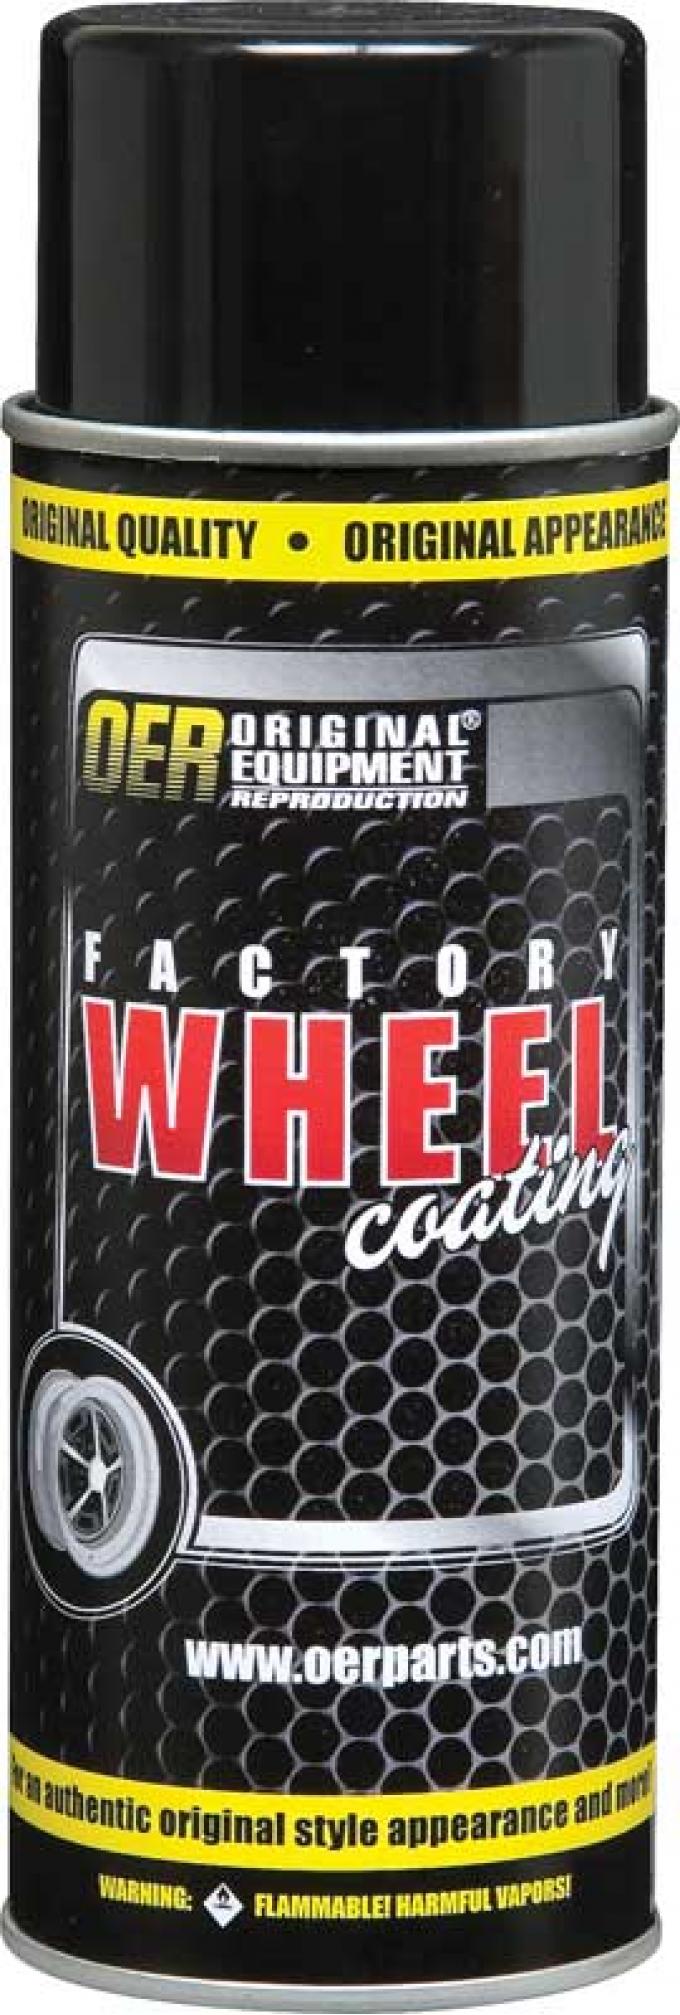 OER Placer Gold Snowflake Wheel "Factory Wheel Coating" Wheel Paint 16 Oz Can K89350